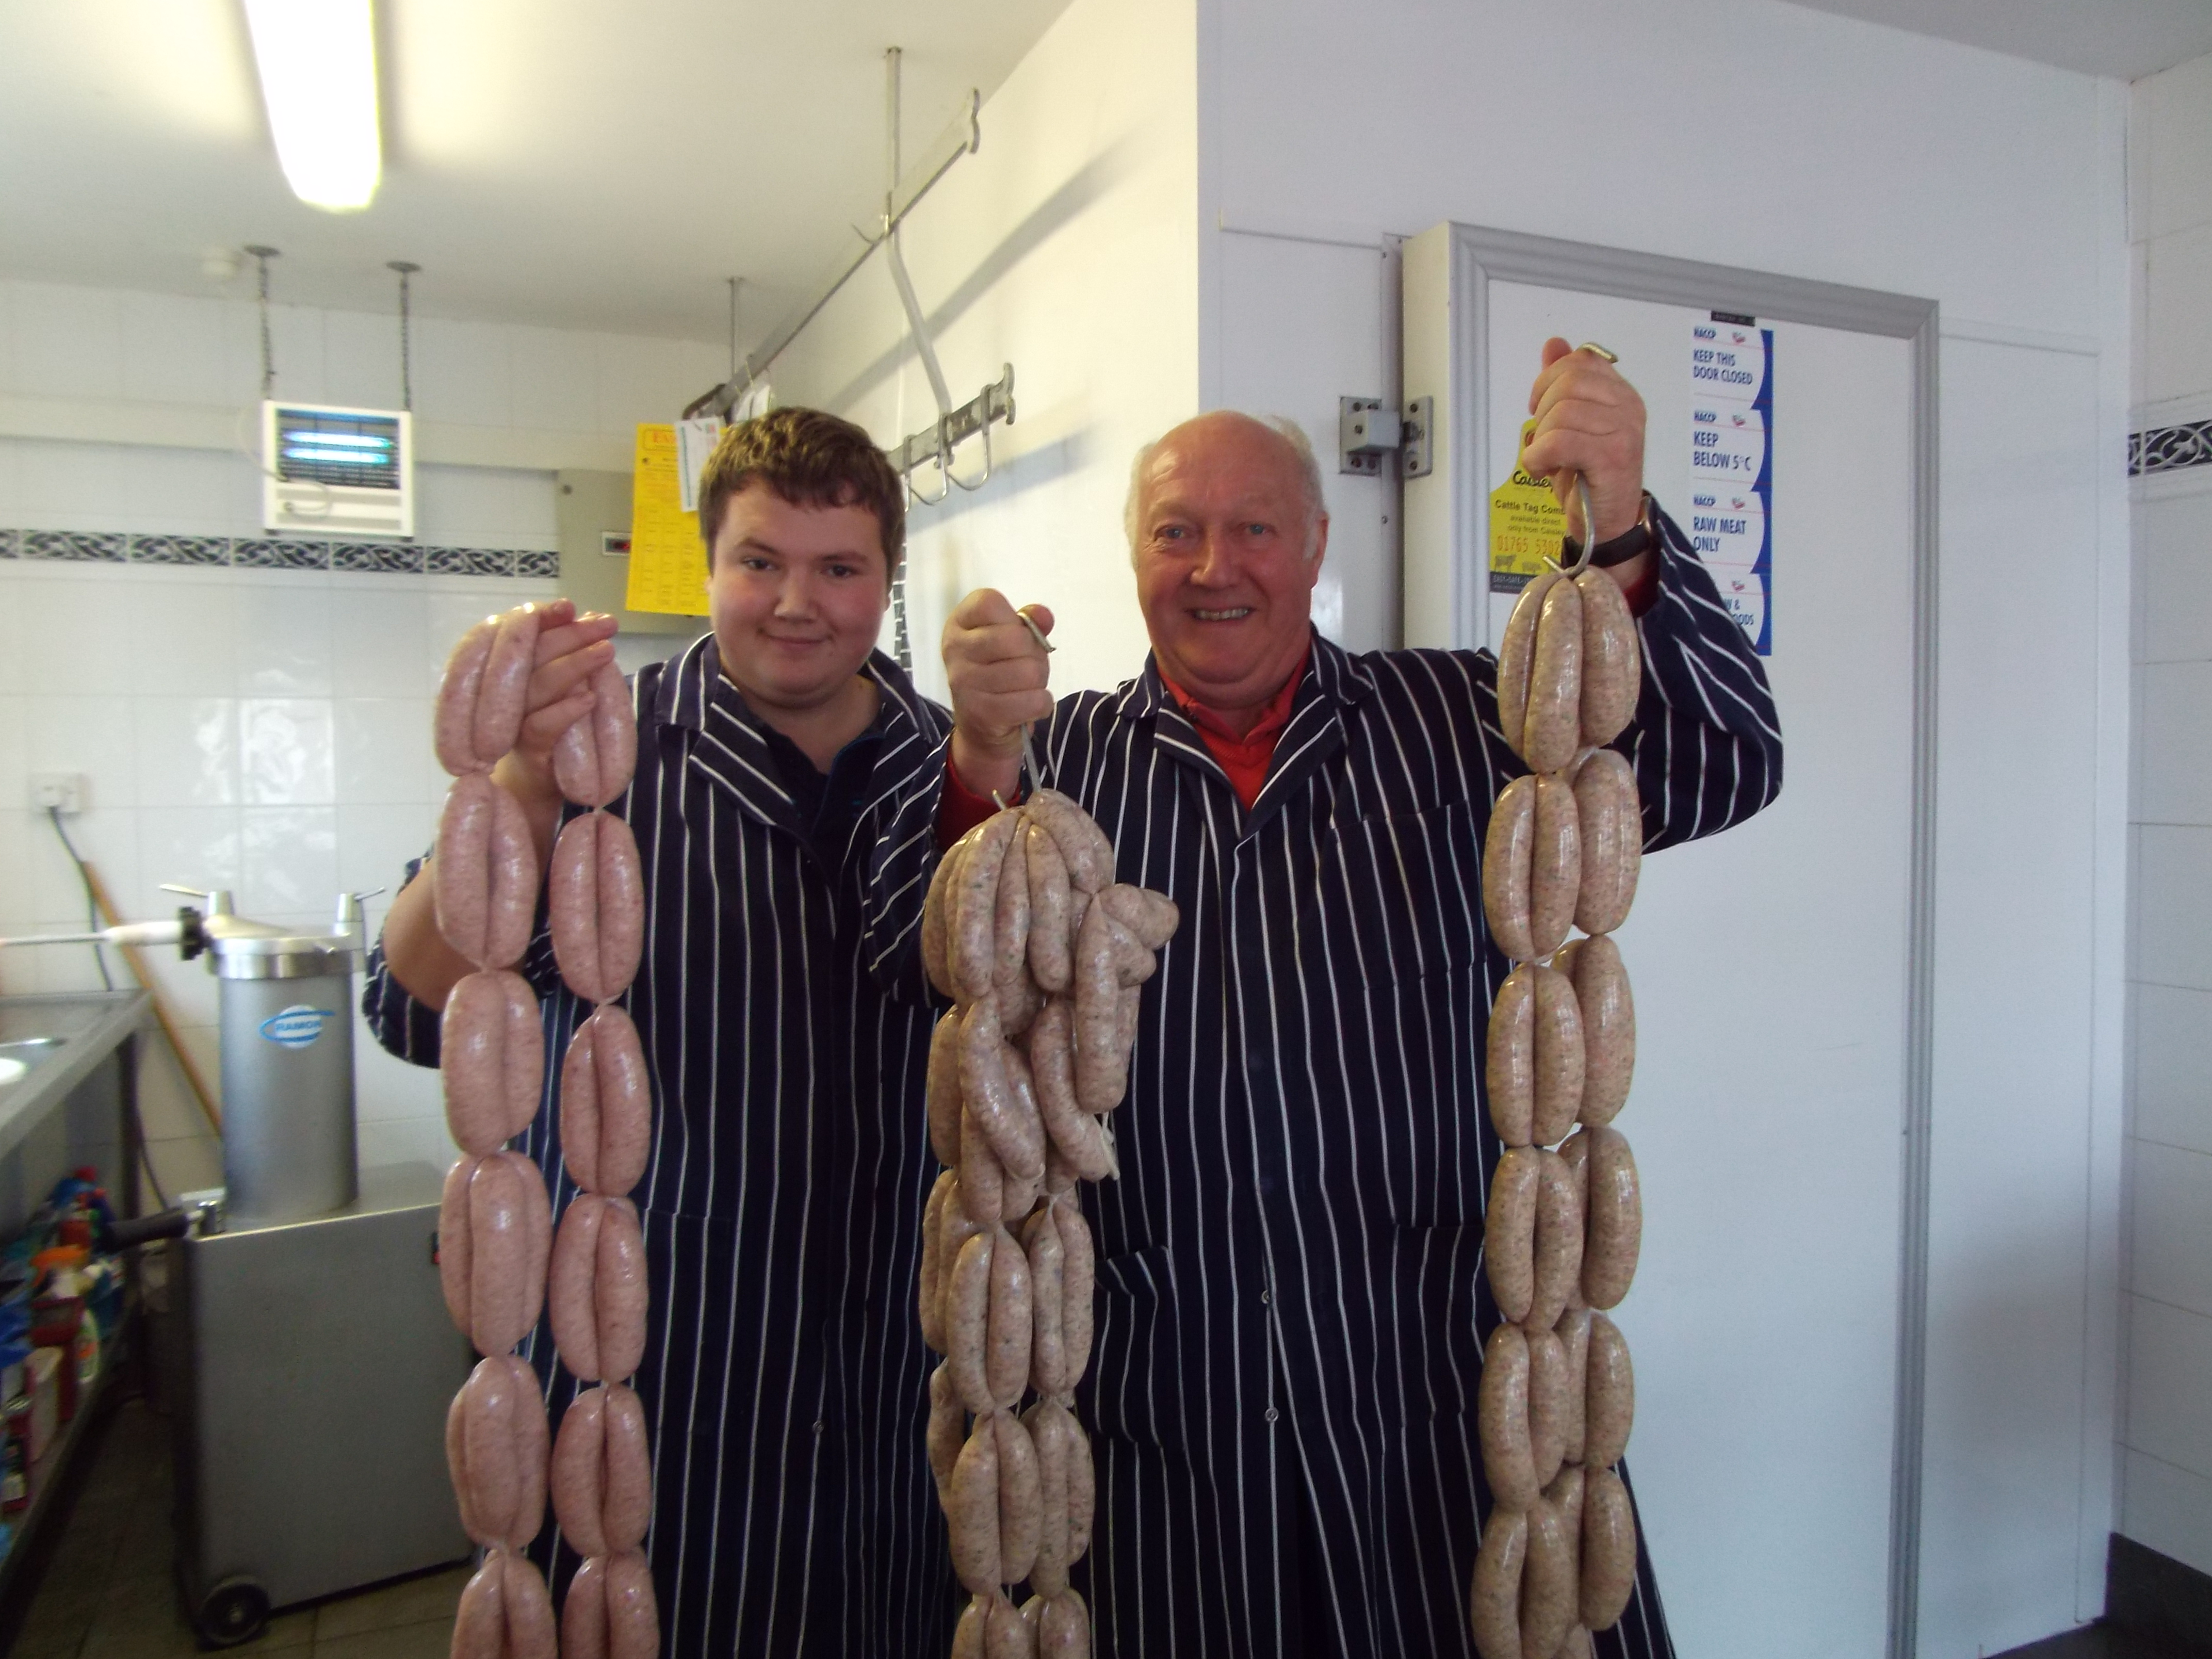 Sion Jones with family farmer and butcher Ben Evans of Llanon butchers